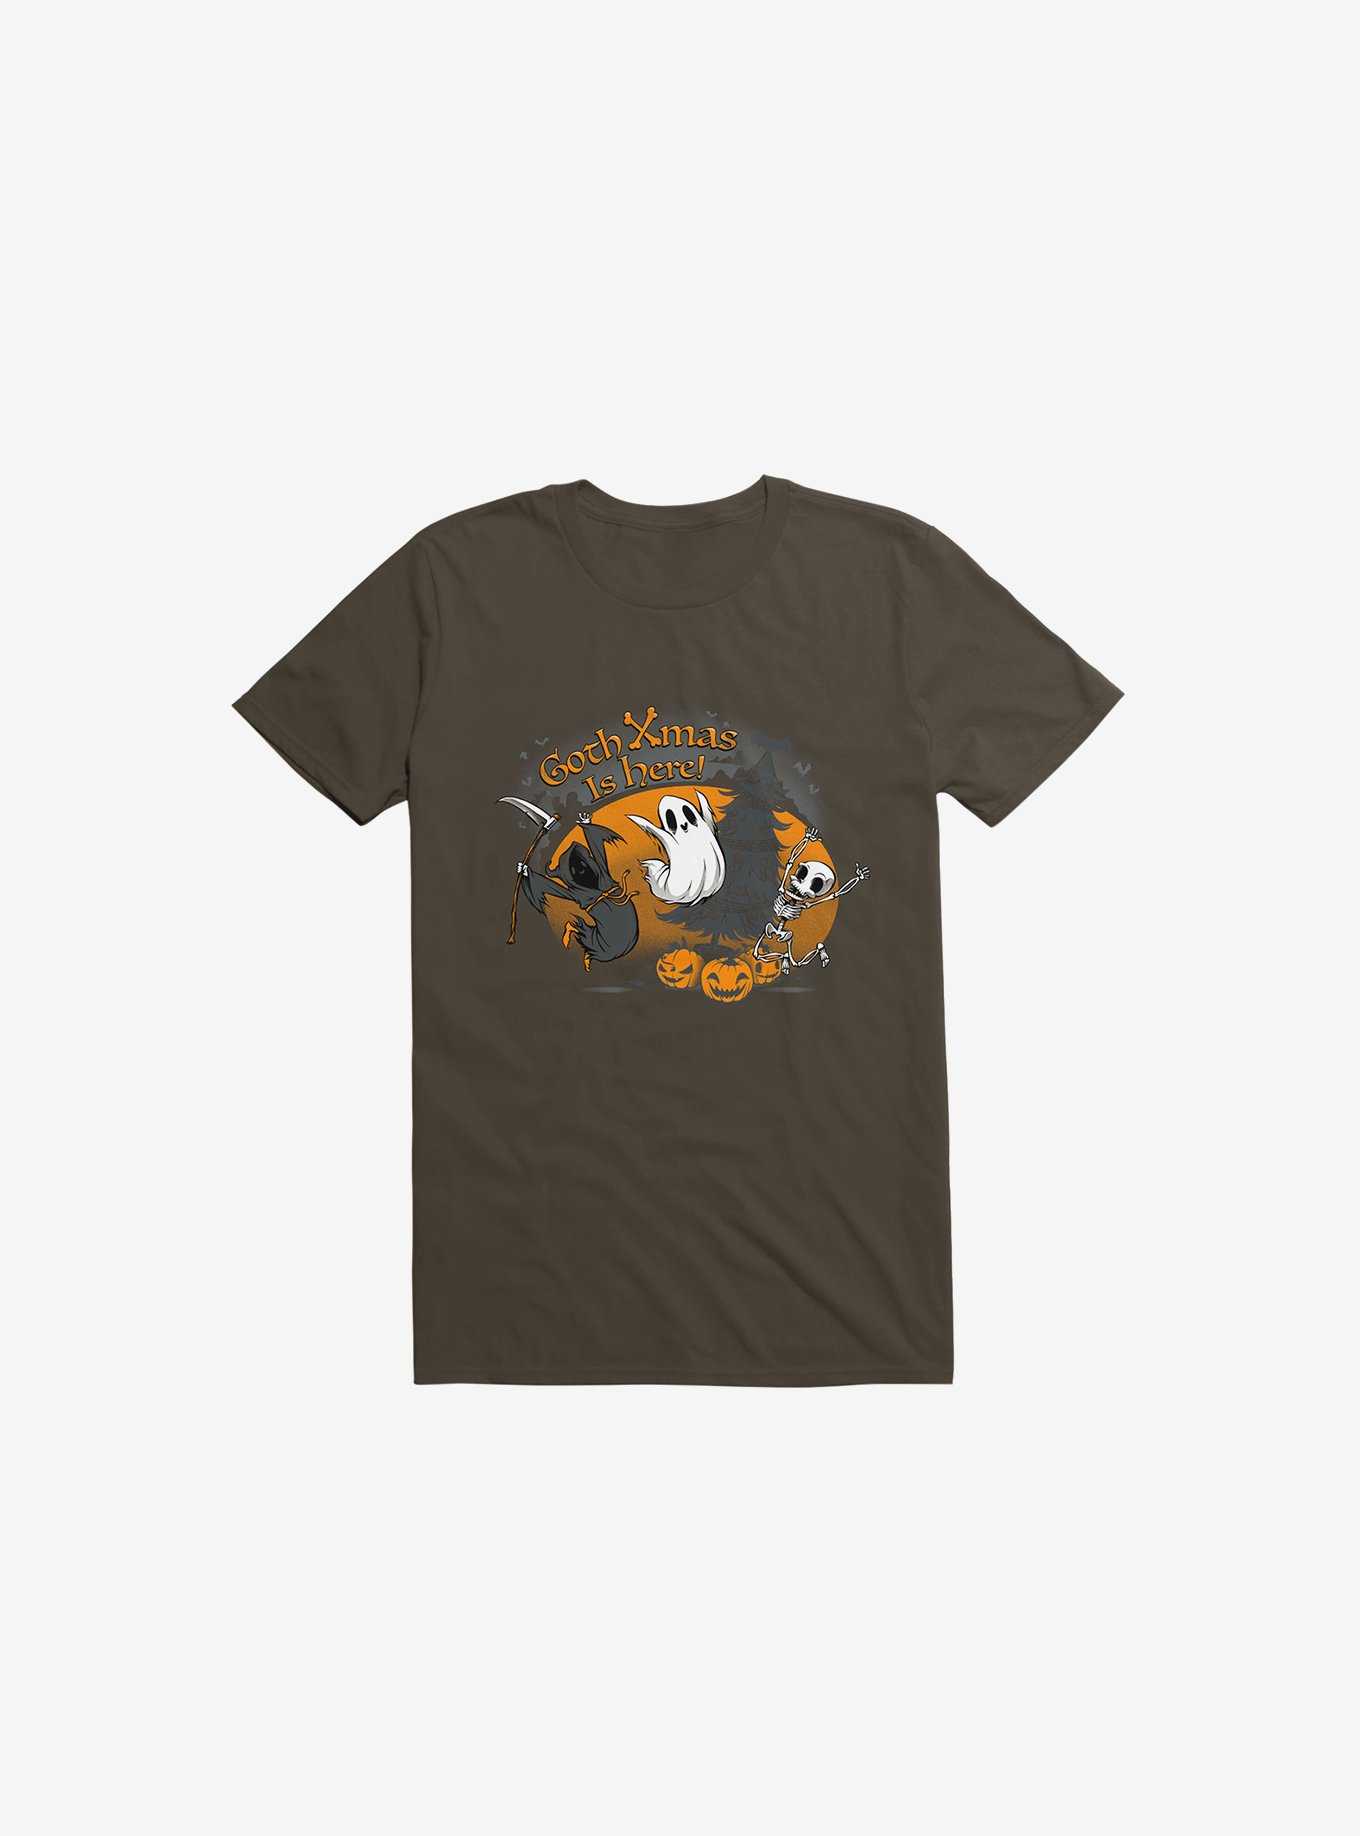 Goth Xmas Is Here Brown T-Shirt, , hi-res